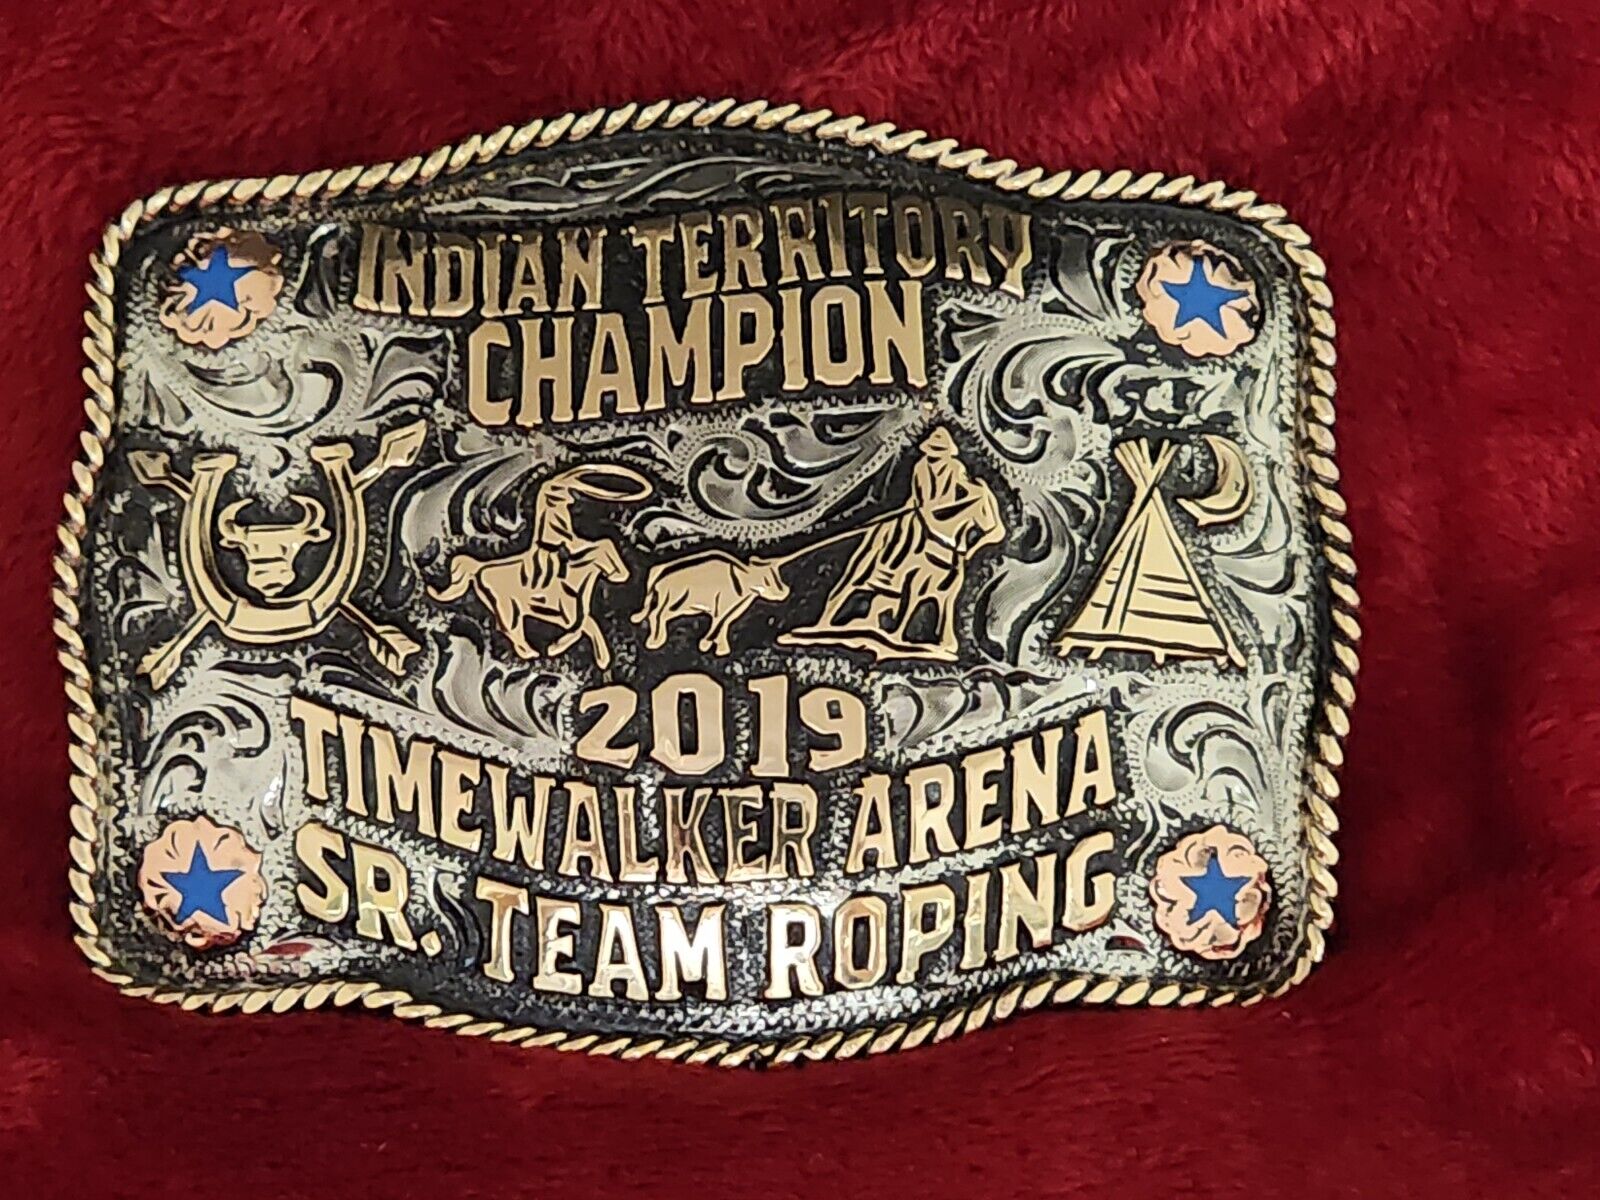 SR. TEAM ROPING CHAMPION PRO RODEO☆INDIAN TERRITORY☆2019☆RARE☆TROPHY BUCKLE☆563